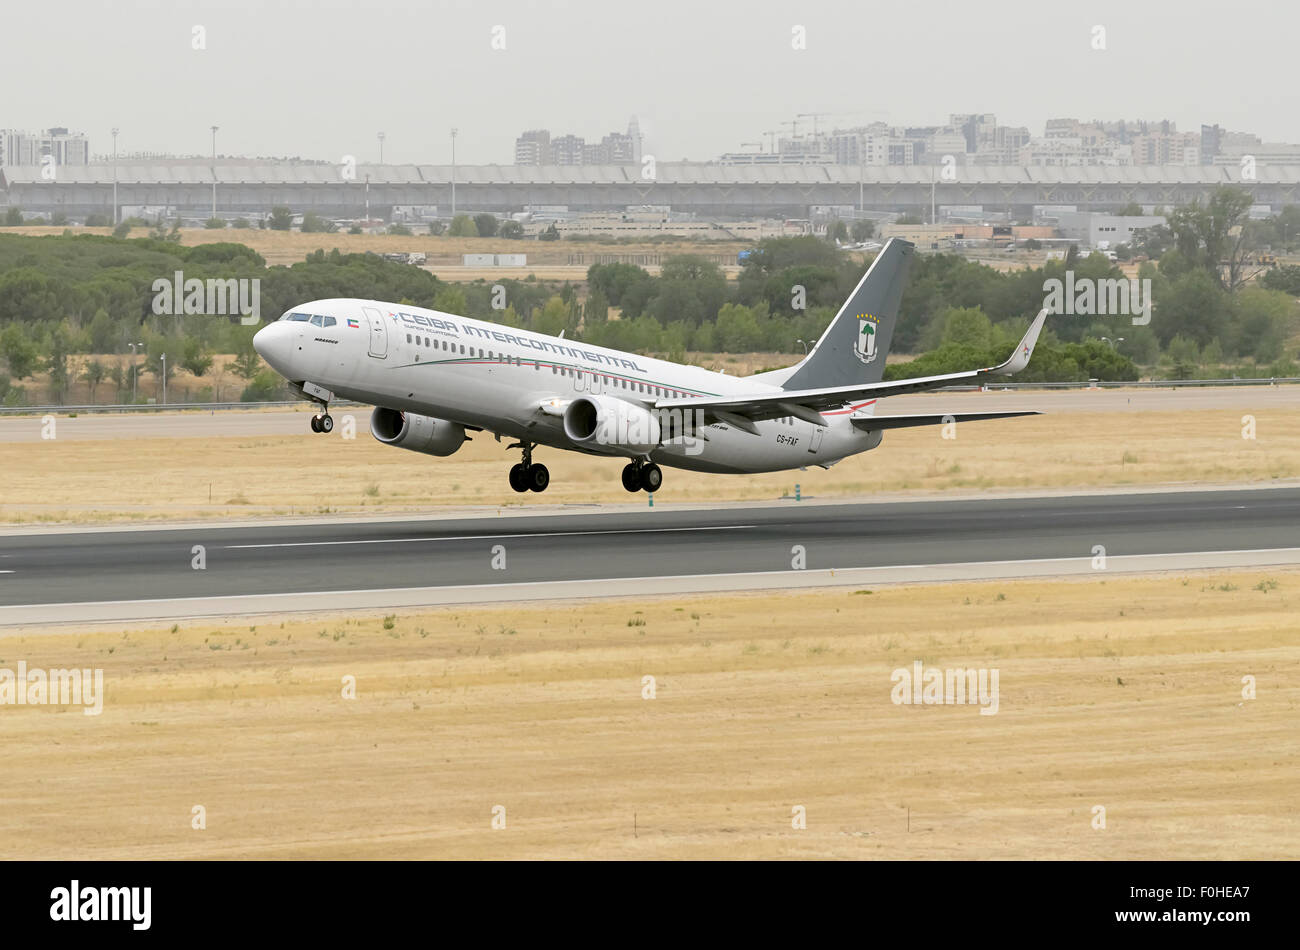 Aircraft -Boeing 737-8FB-, of -Ceiba Intercontinental- airline, is taking off from Madrid-Barajas -Adolfo Suarez- airport. Stock Photo